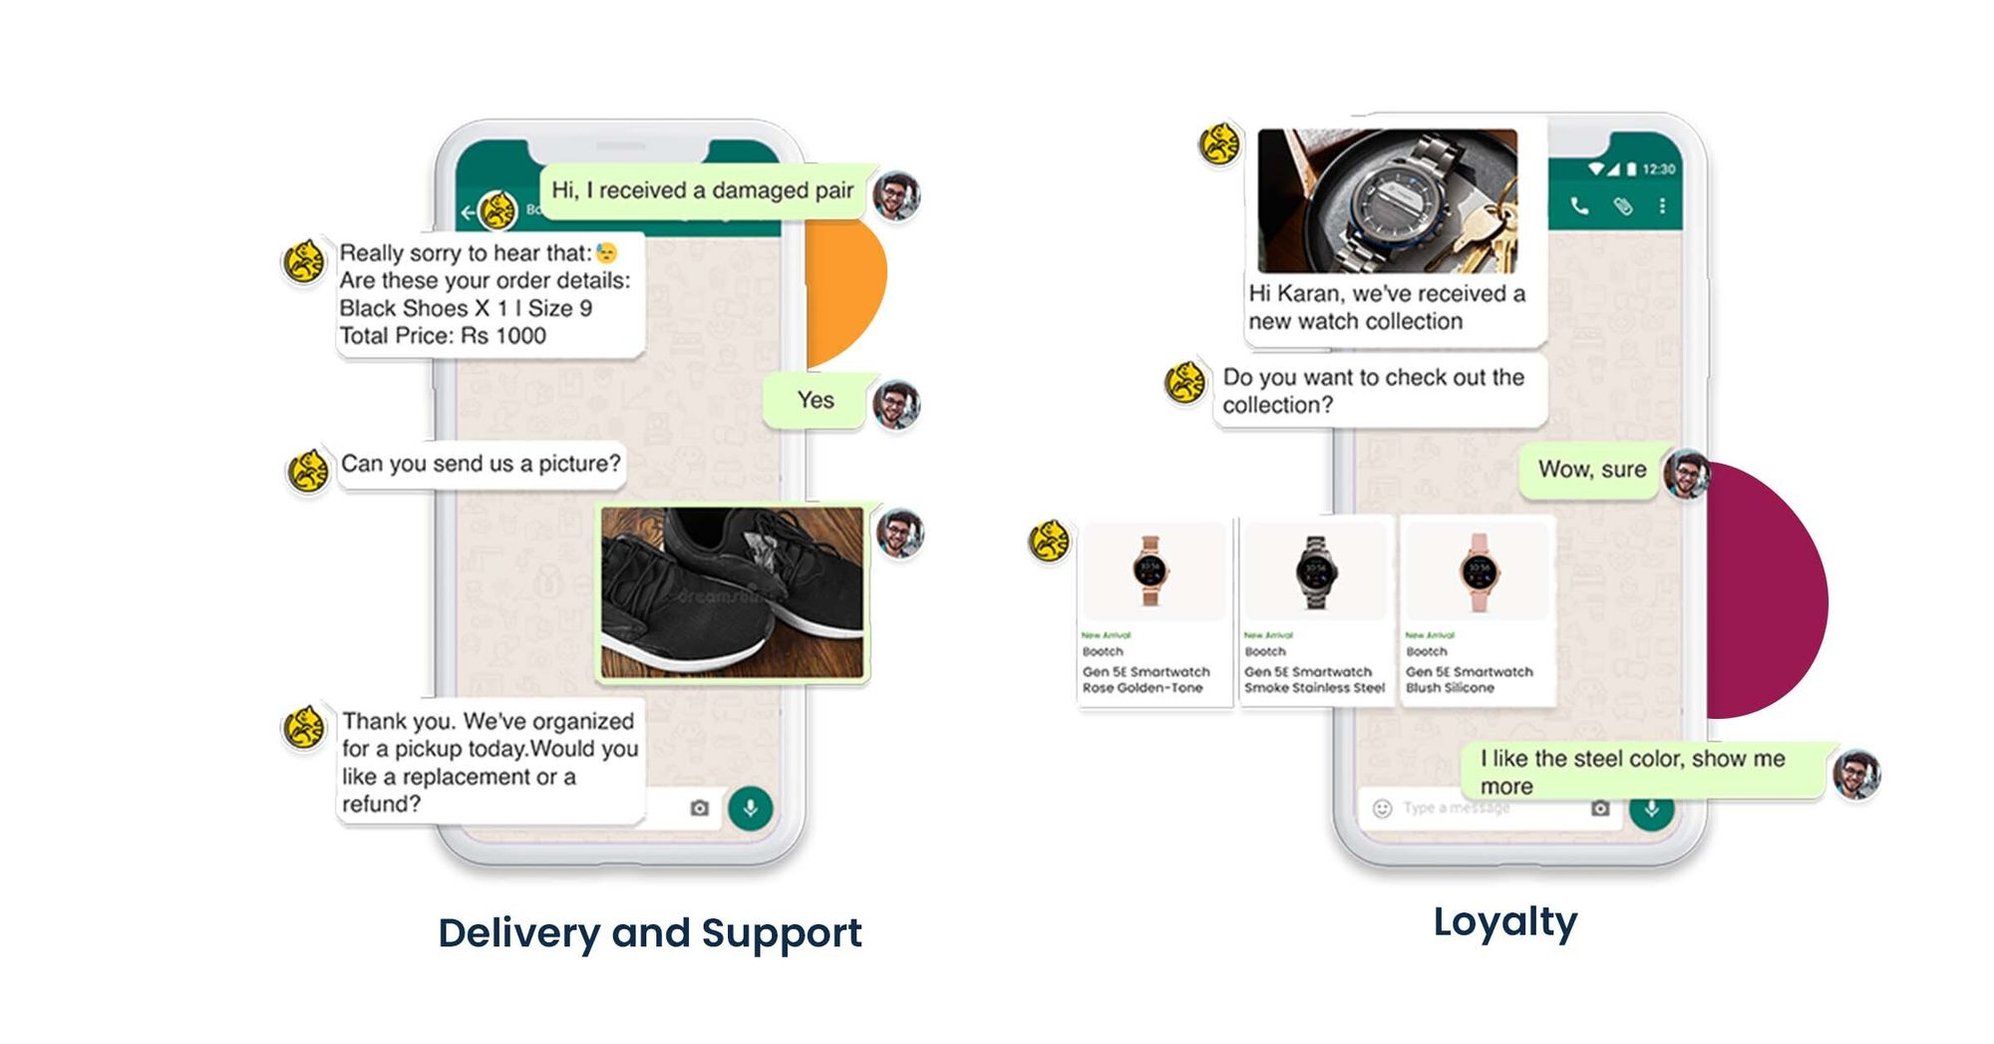 Customer support and loyalty using conversational commerce